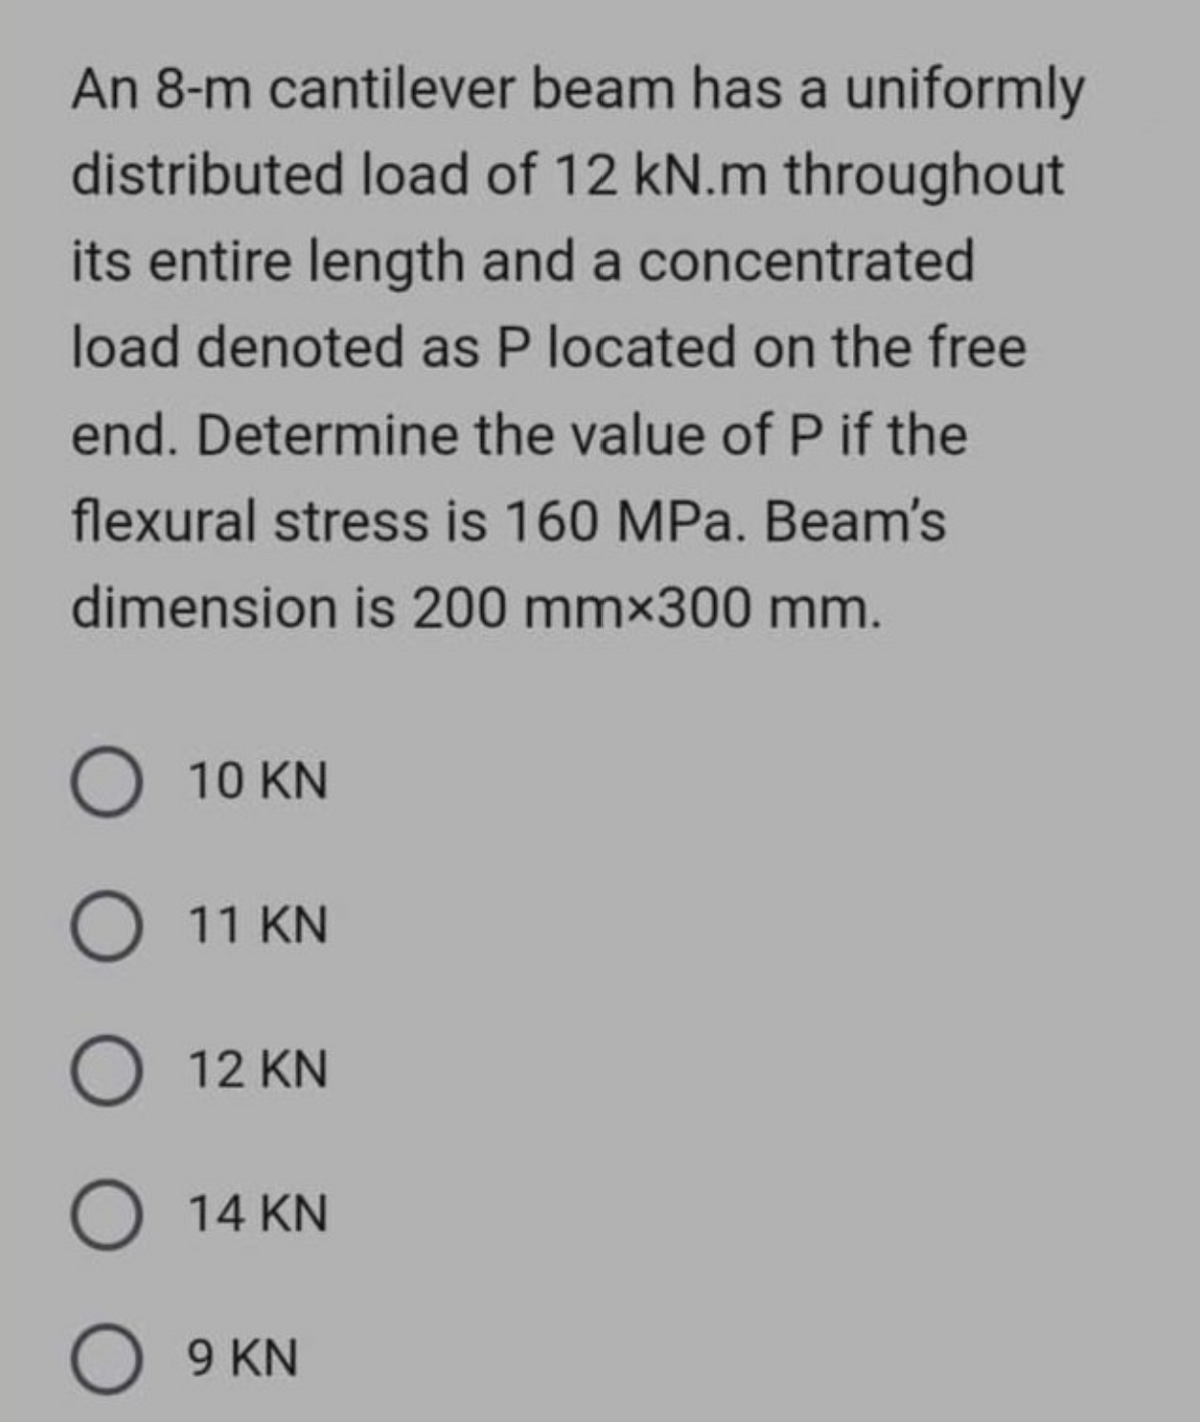 An 8-m cantilever beam has a uniformly
distributed load of 12 kN.m throughout
its entire length and a concentrated
load denoted as P located on the free
end. Determine the value of P if the
flexural stress is 160 MPa. Beam's
dimension is 200 mmx300 mm.
O 10 KN
O 11 KN
O 12 KN
O 14 KN
O 9 KN